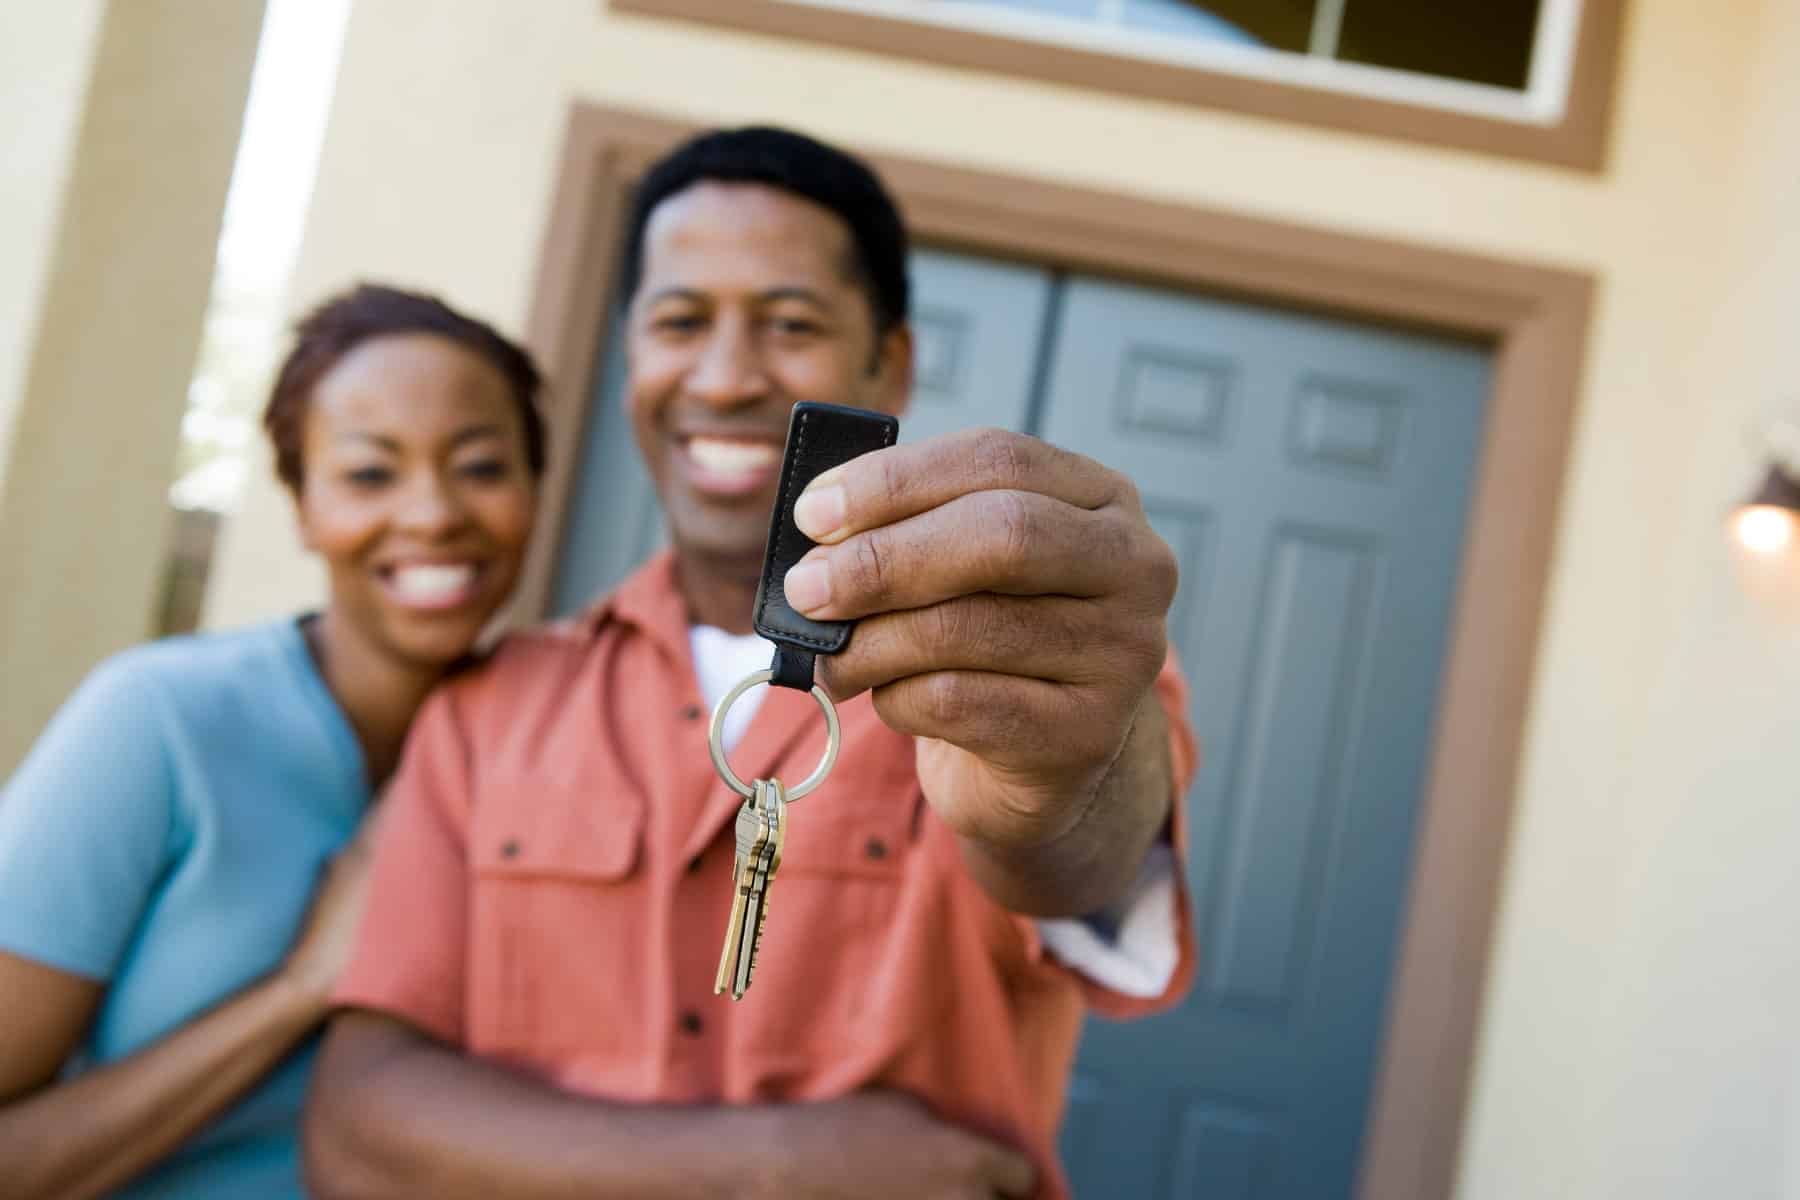 First-time home buyers standing in front of a new home holding the keys